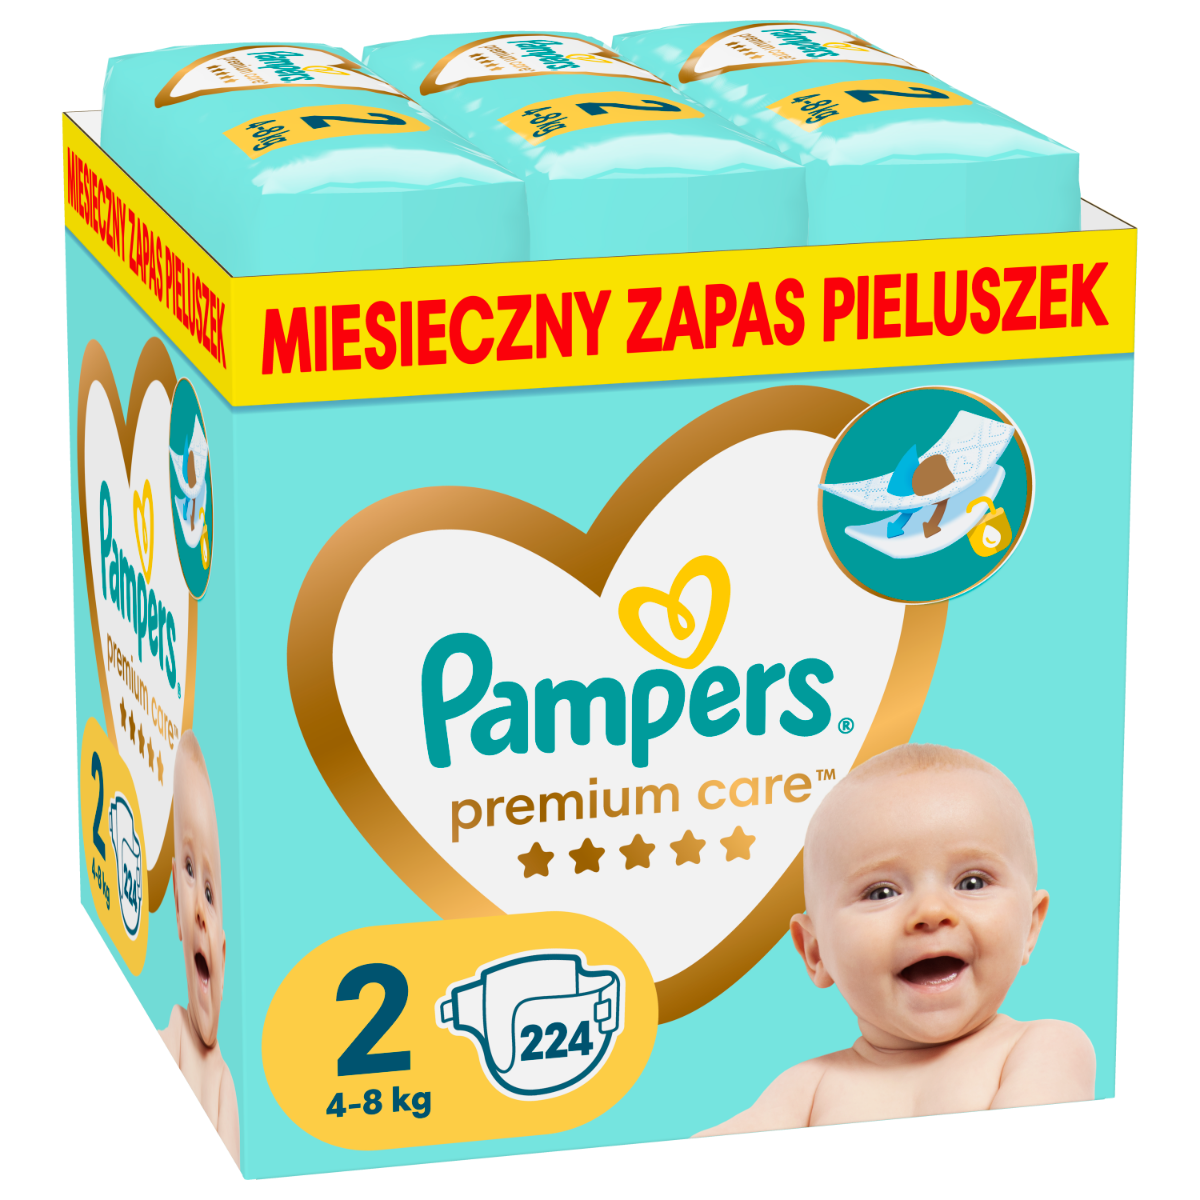 pampers premium protection wizaz